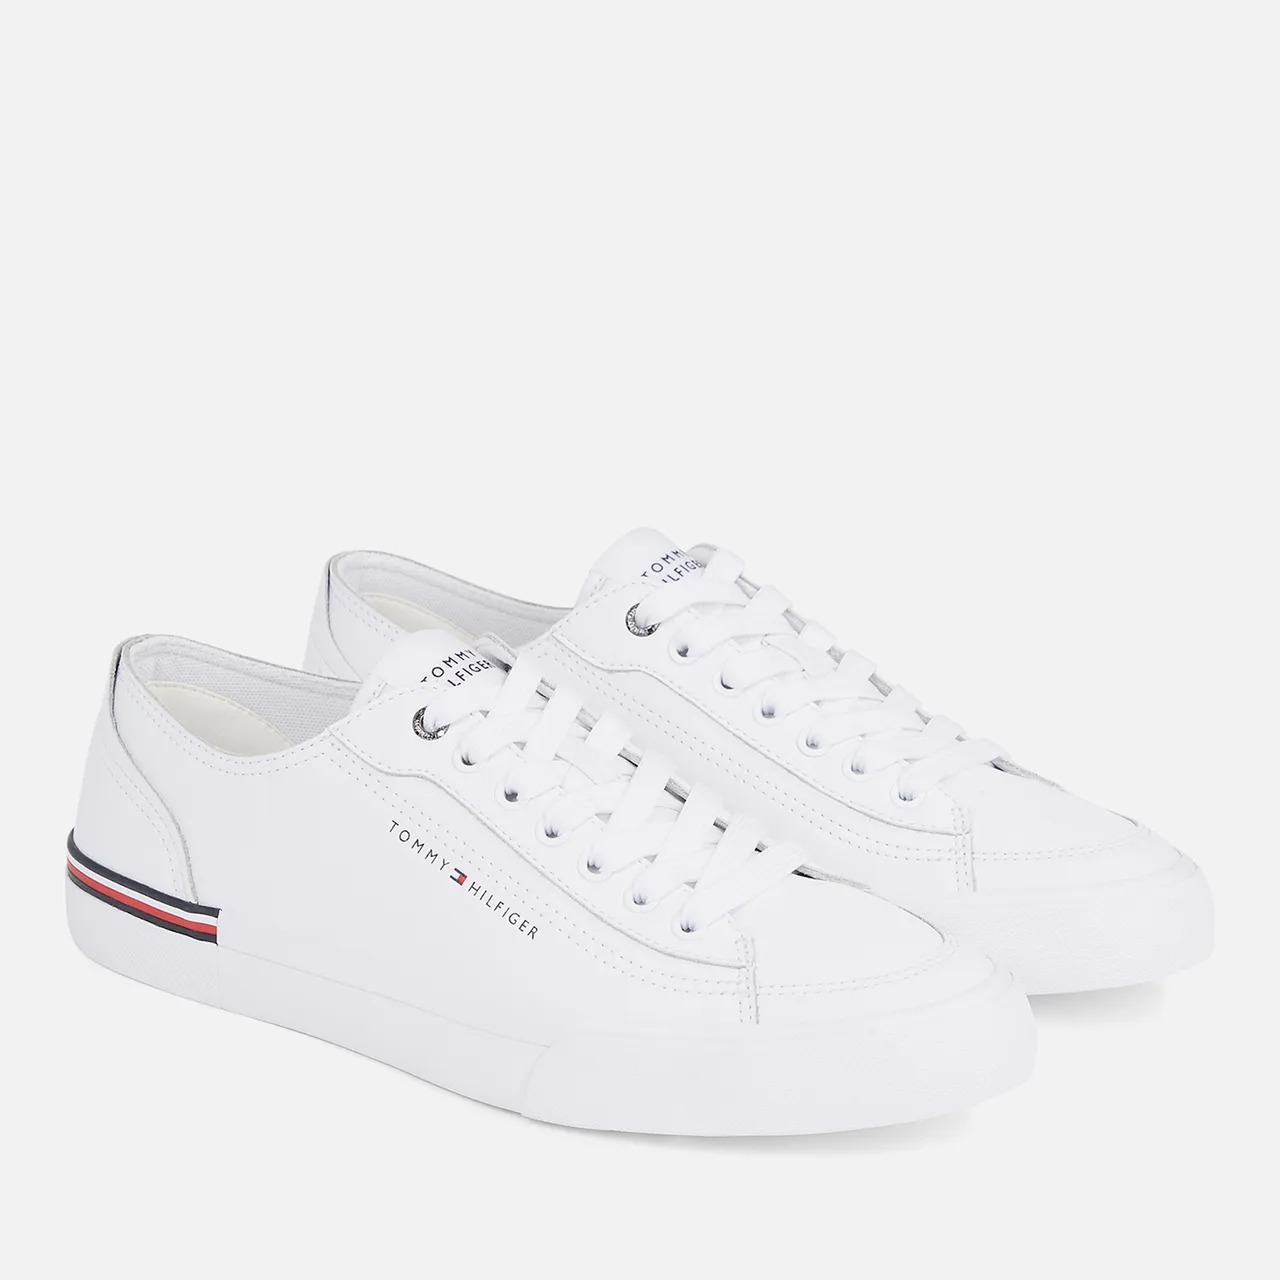 Tommy Hilfiger Men's Vulcanized Leather and Faux Leather Trainers